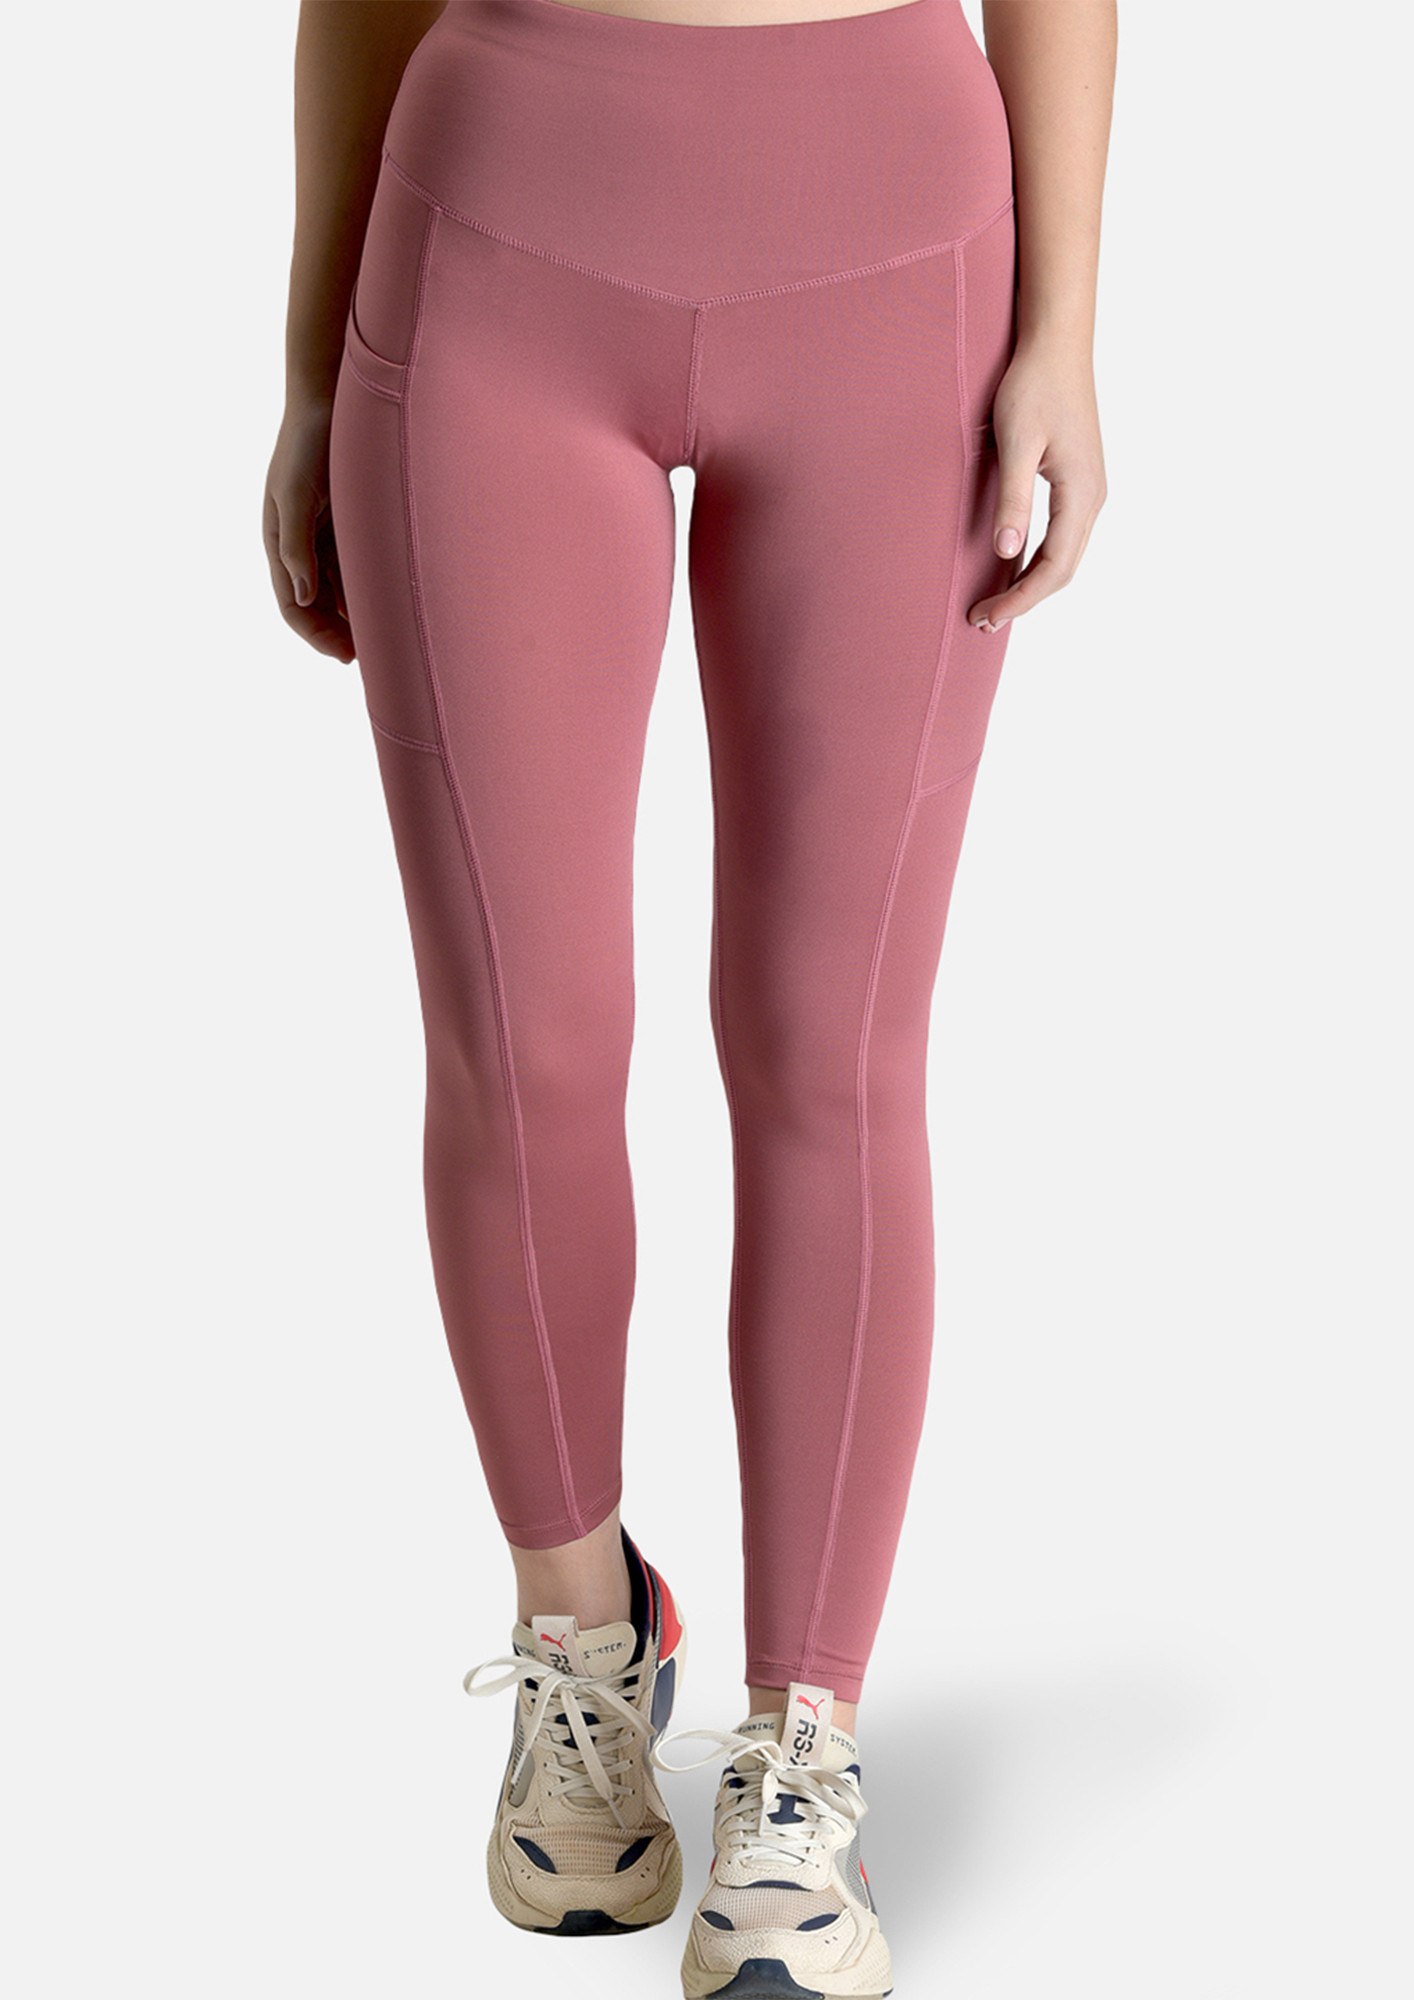 Slim Fit Leggings For Girls | International Society of Precision Agriculture